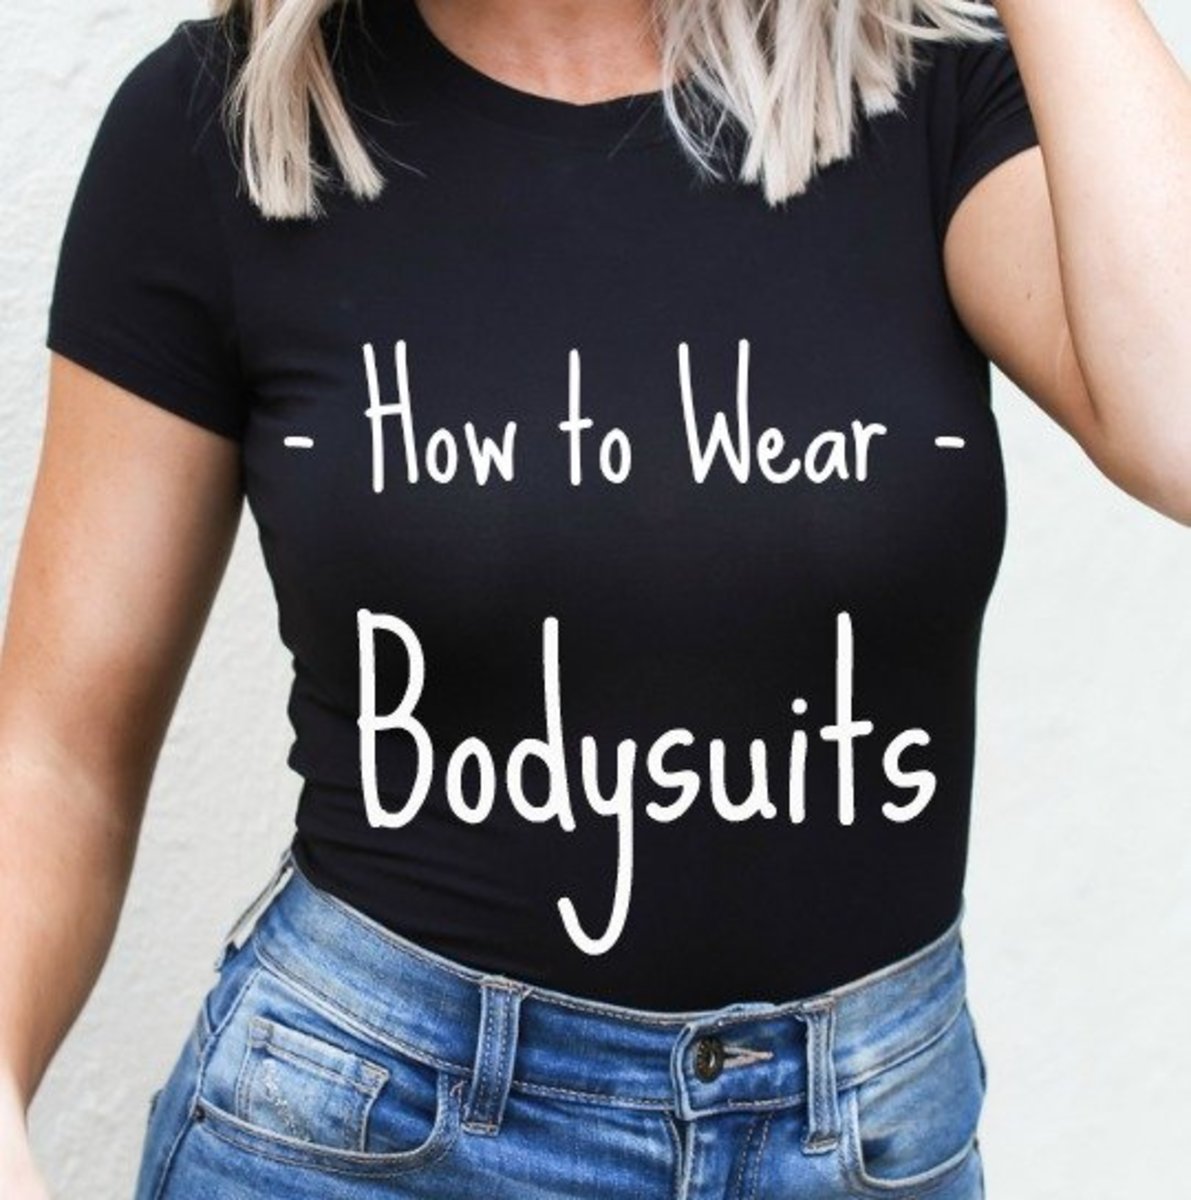 How to Wear Bodysuits